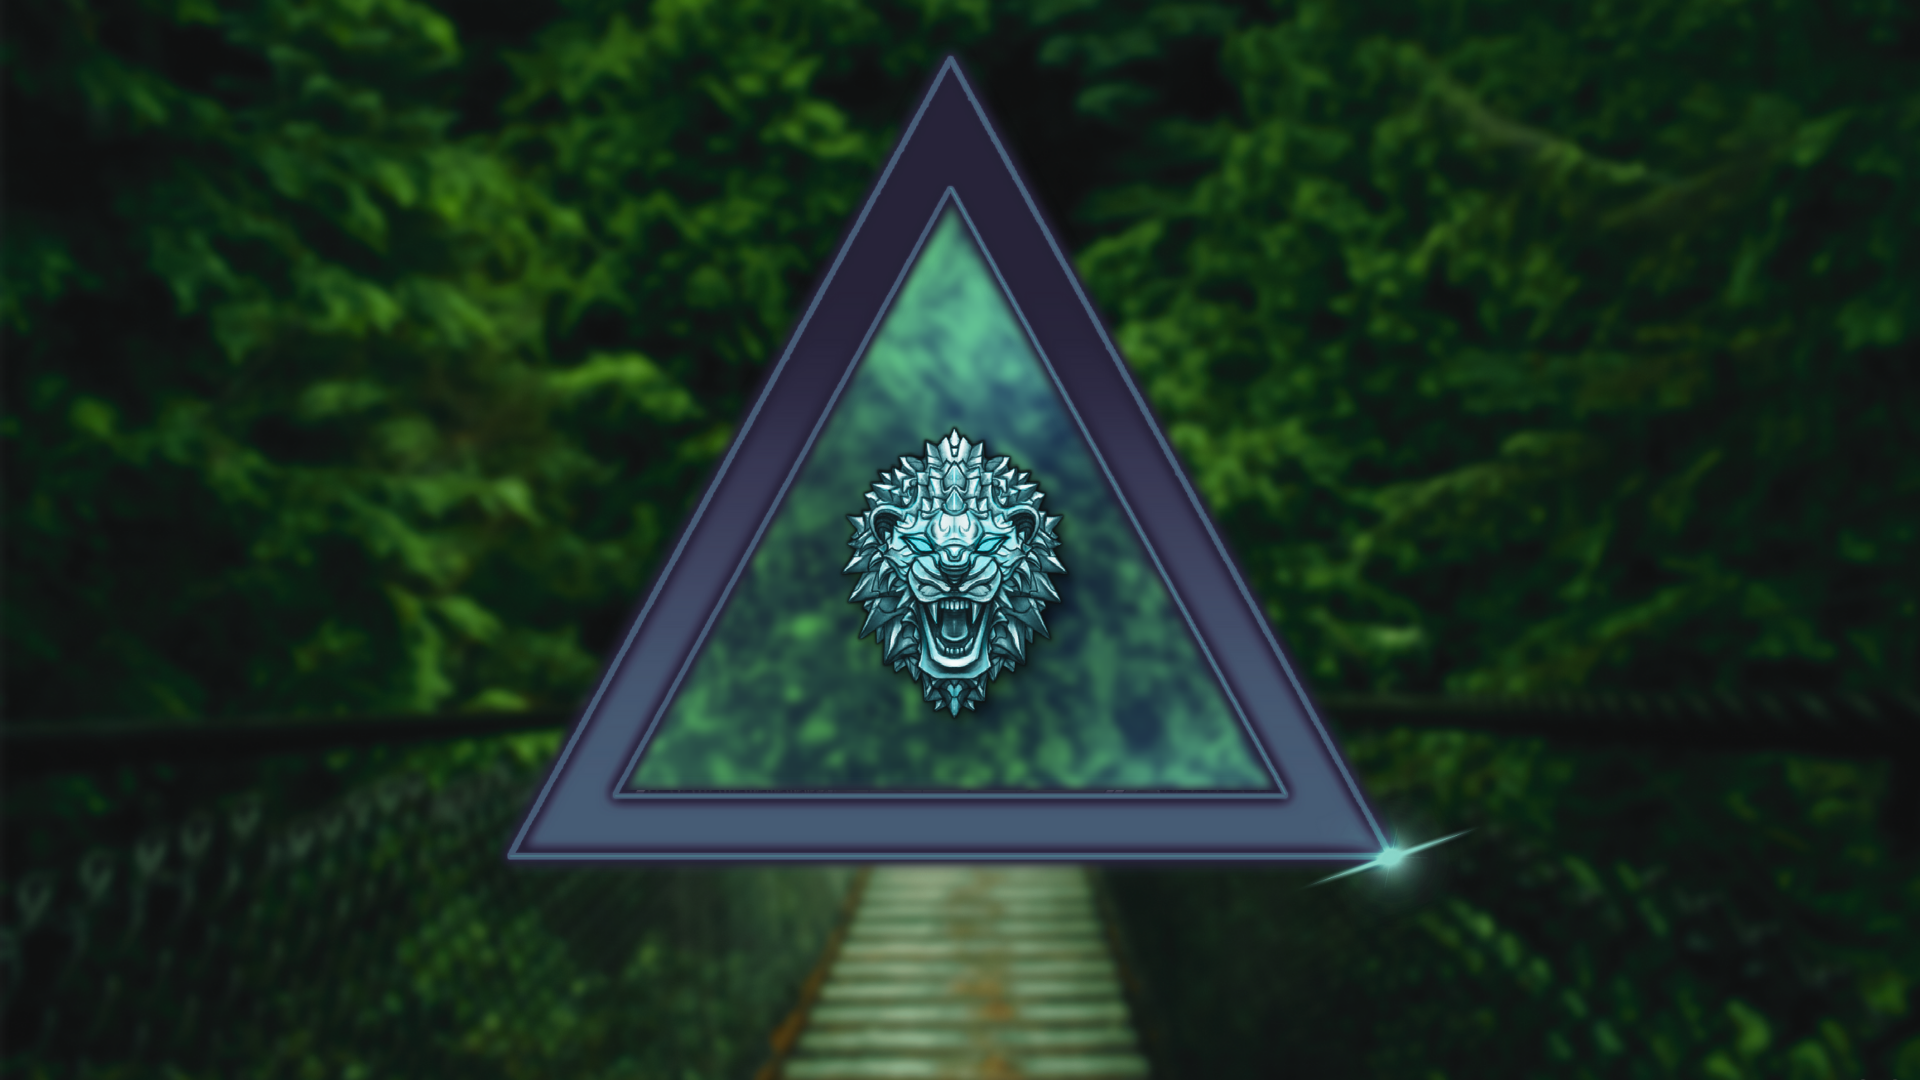 General 1920x1080 forest green lion triangle picture-in-picture